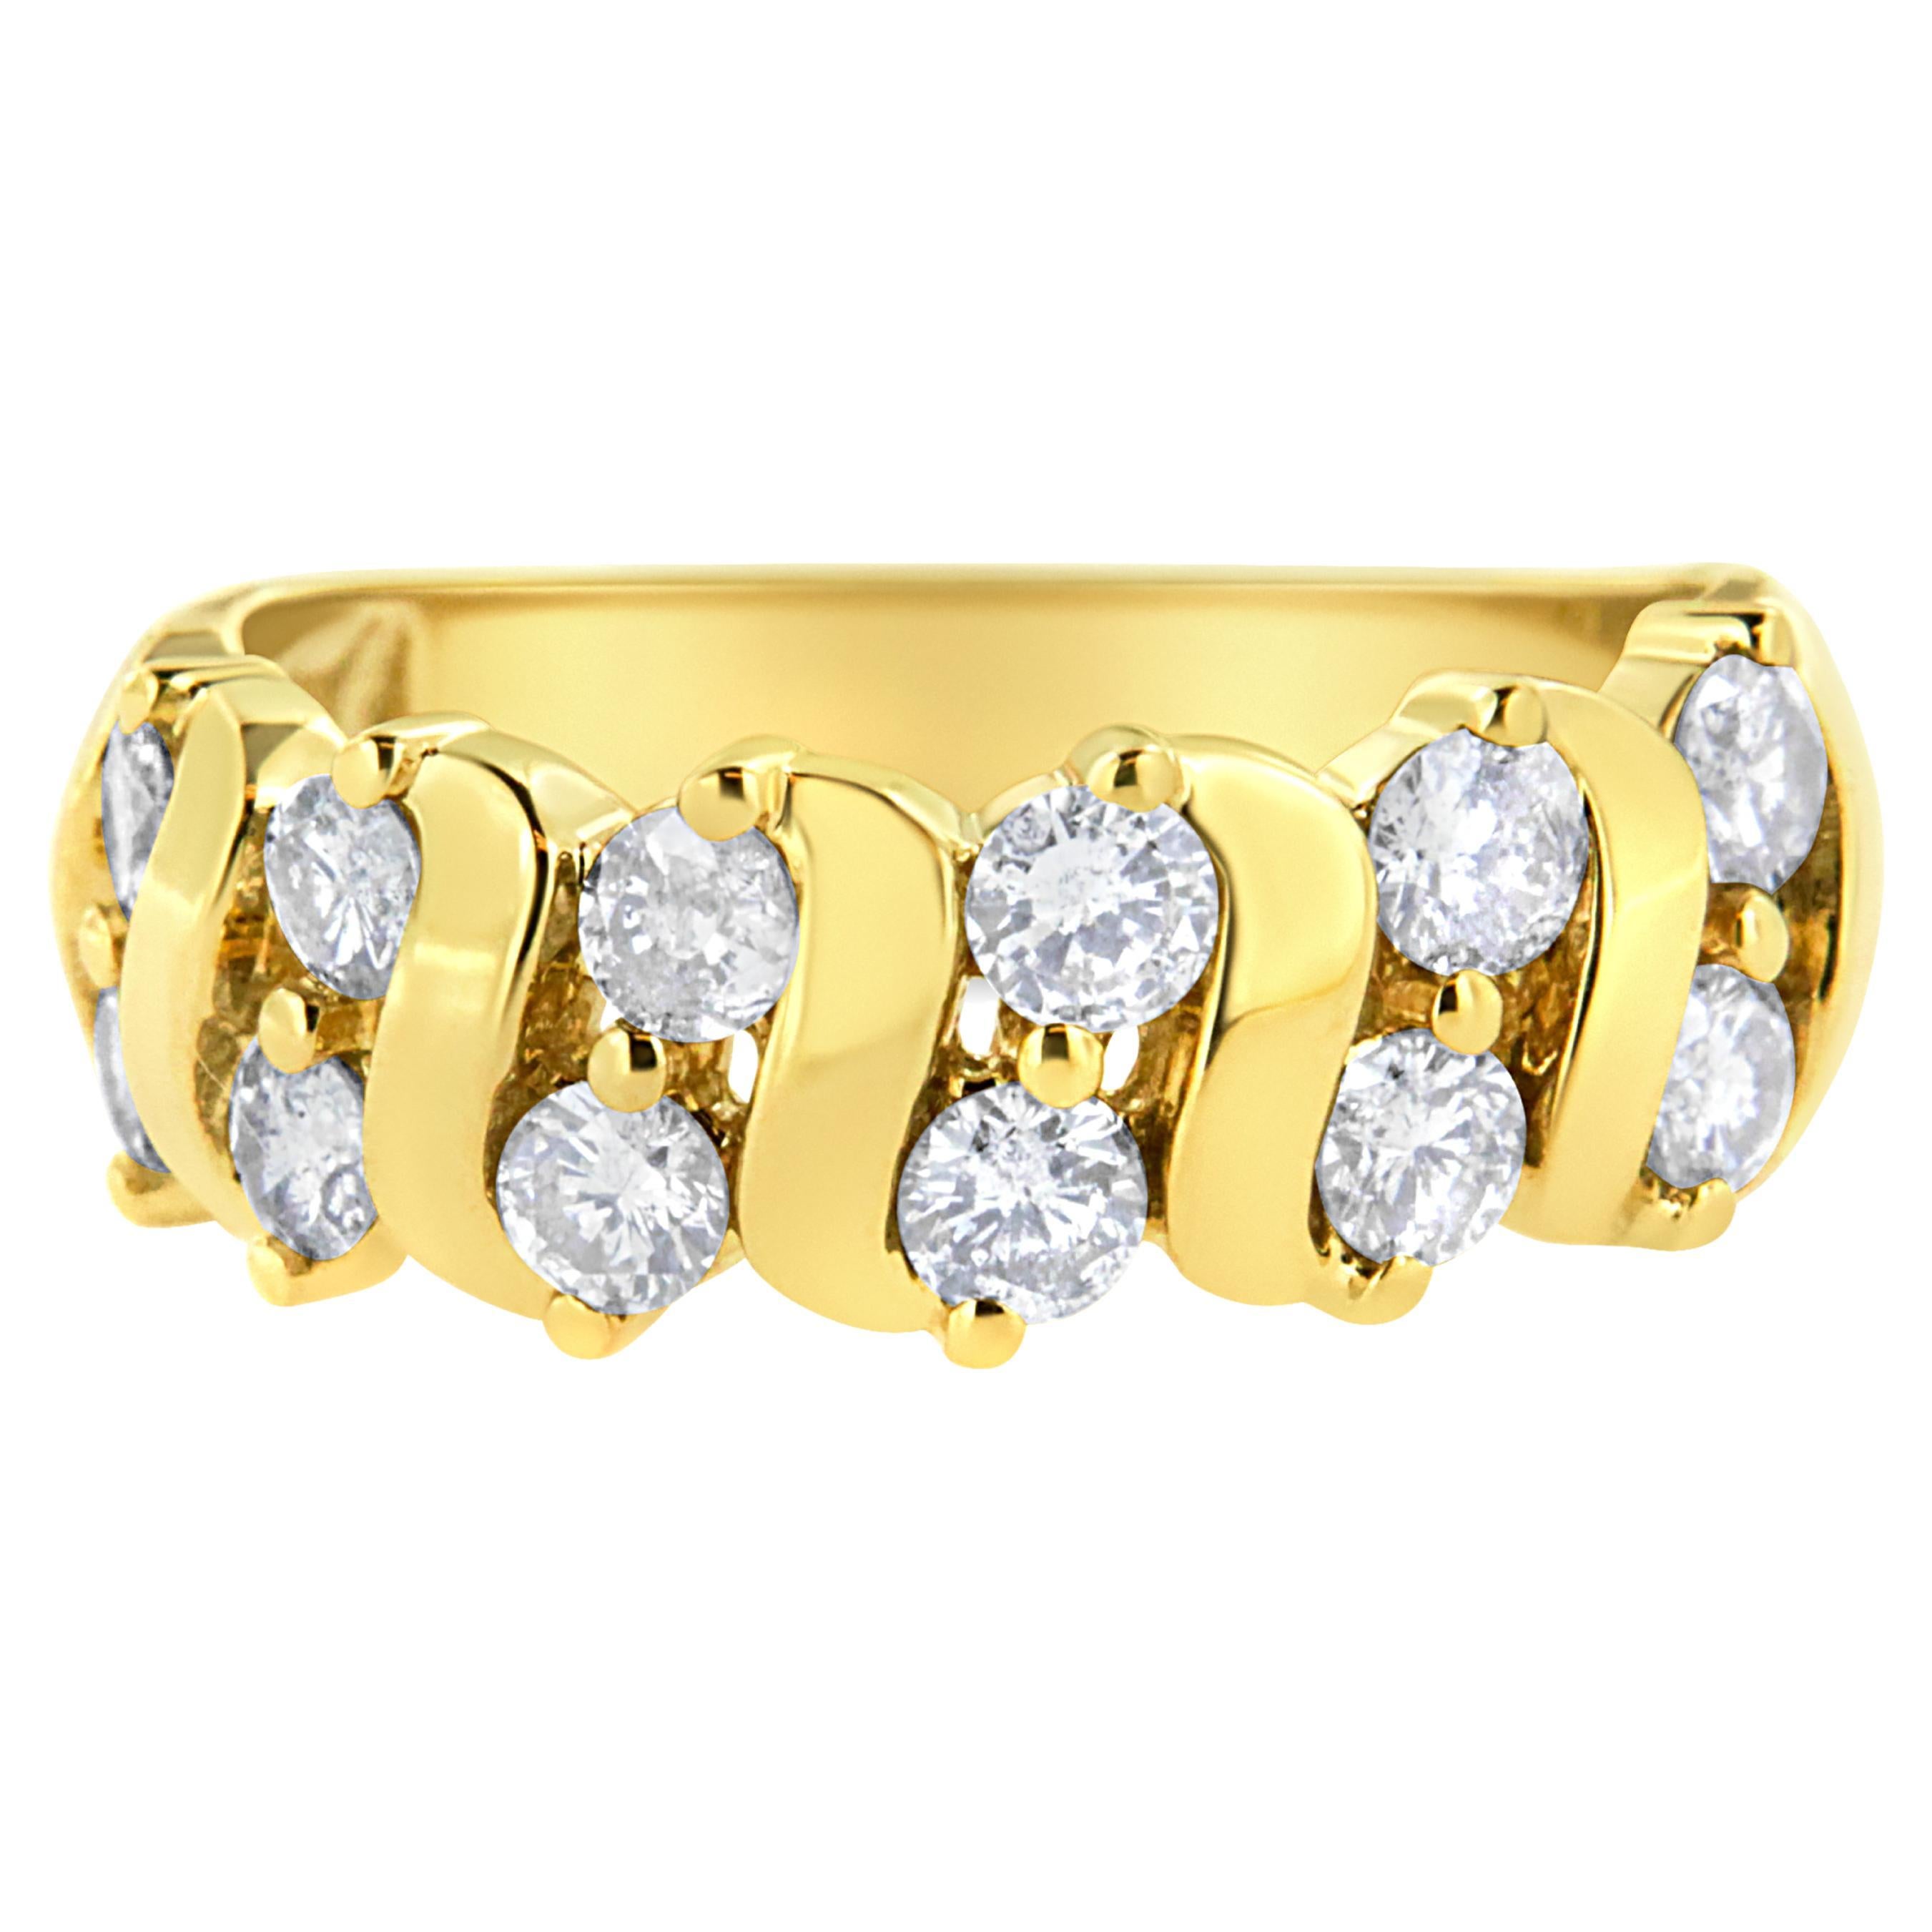 10K Yellow Gold 1.0 Carat S Link Two Row Diamond Band Ring